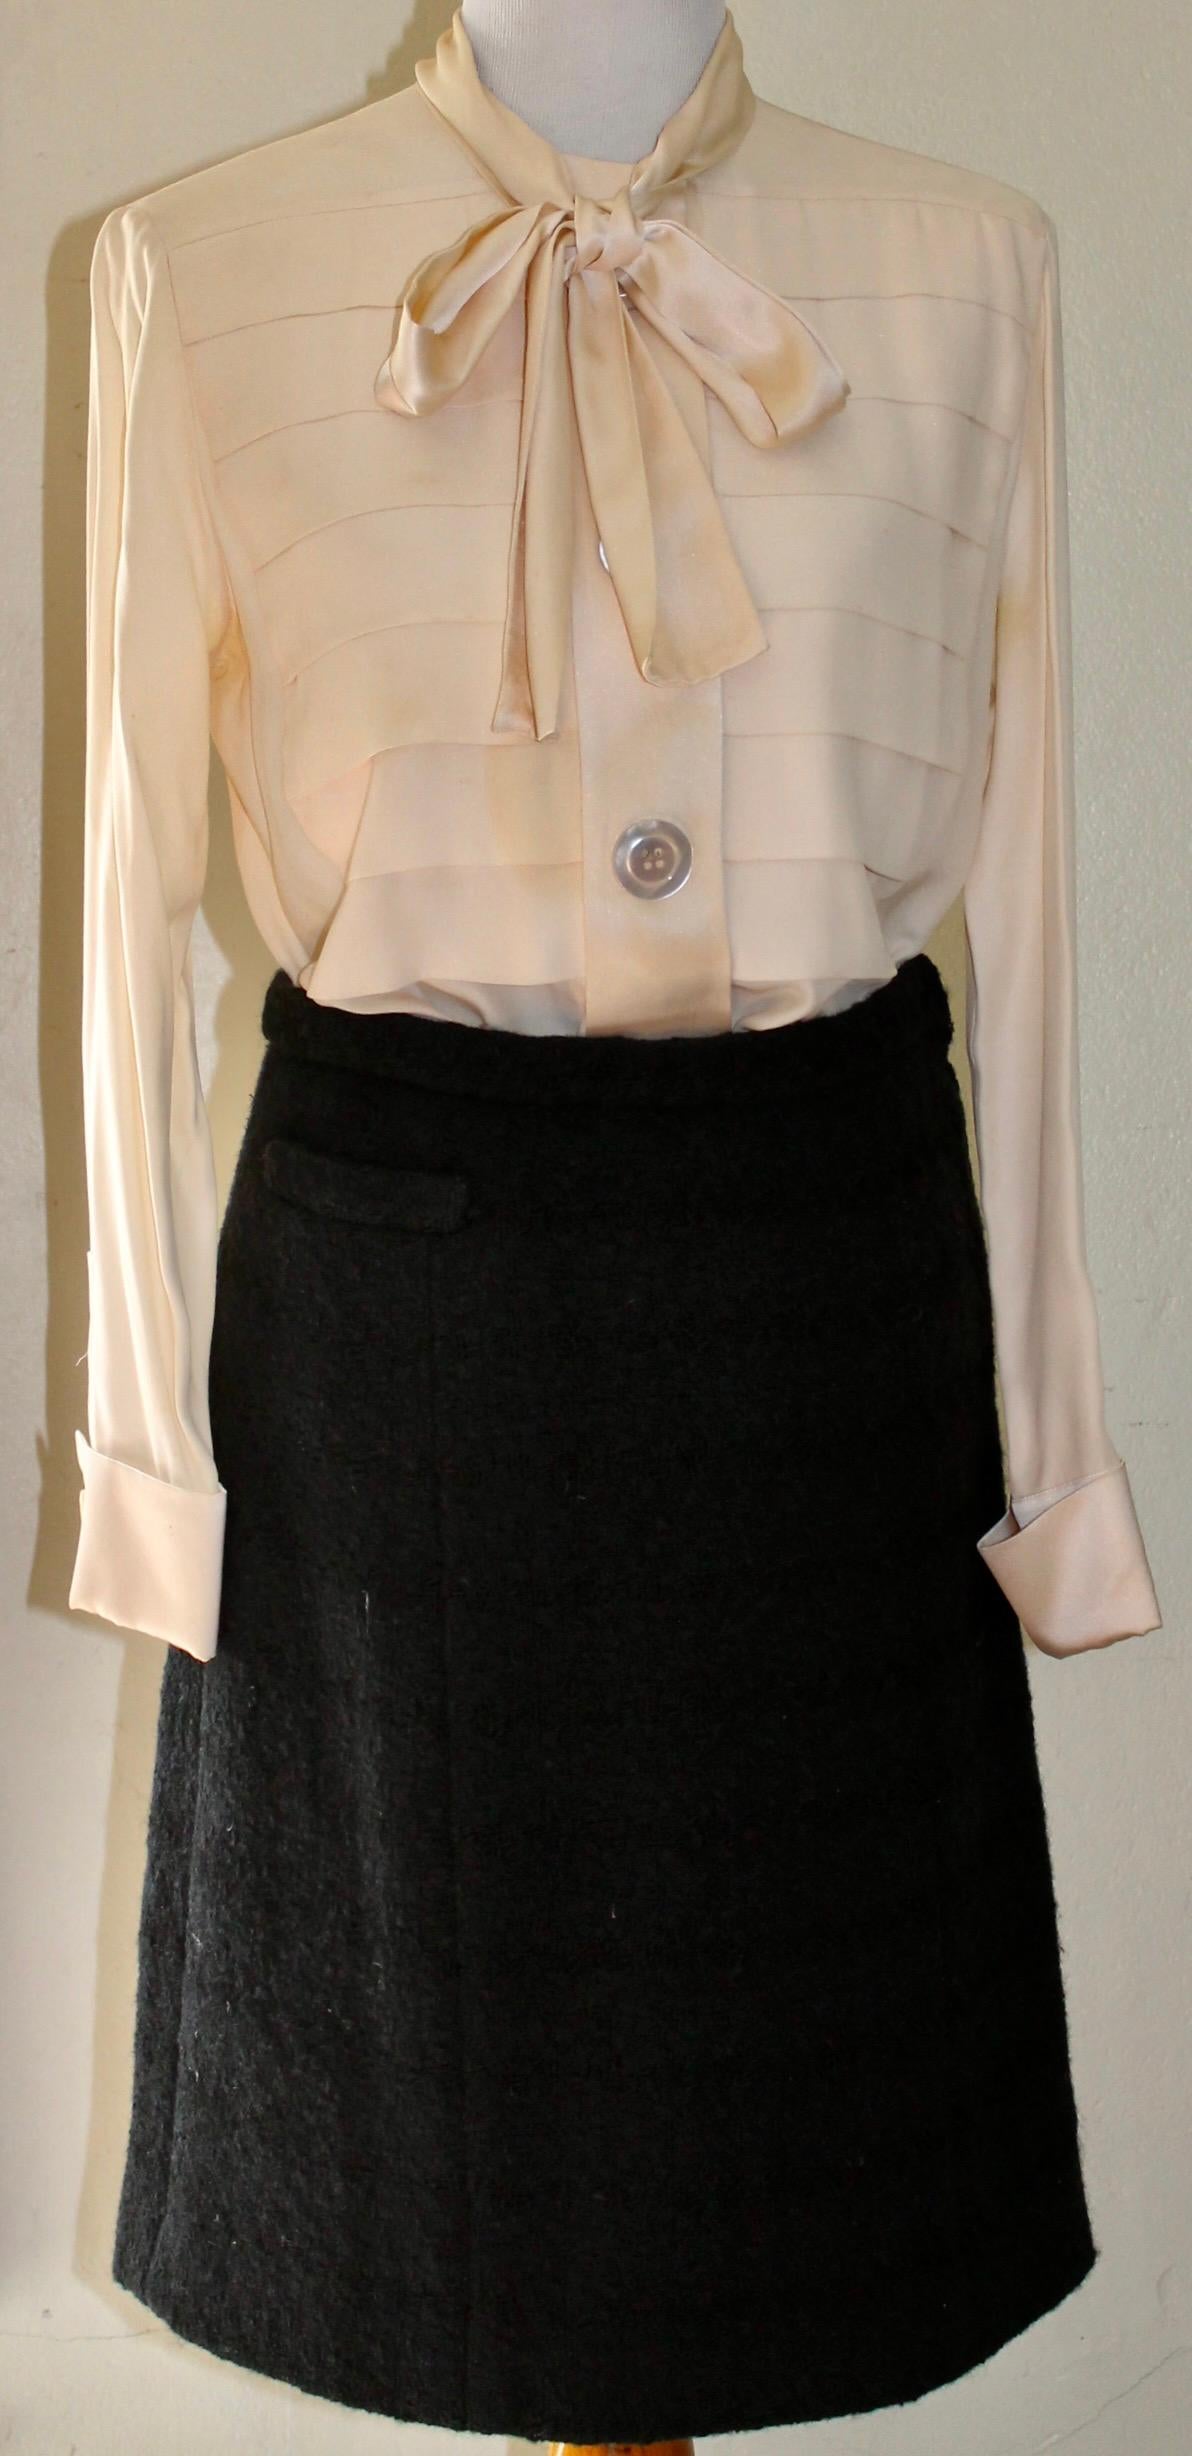 Offering a Silk Blouse and Wool Skirt ensemble. Skirt is 100% thick wool with a horizontal weave, and an all silk lining. Small pocket on right front.
Skirt waist 28